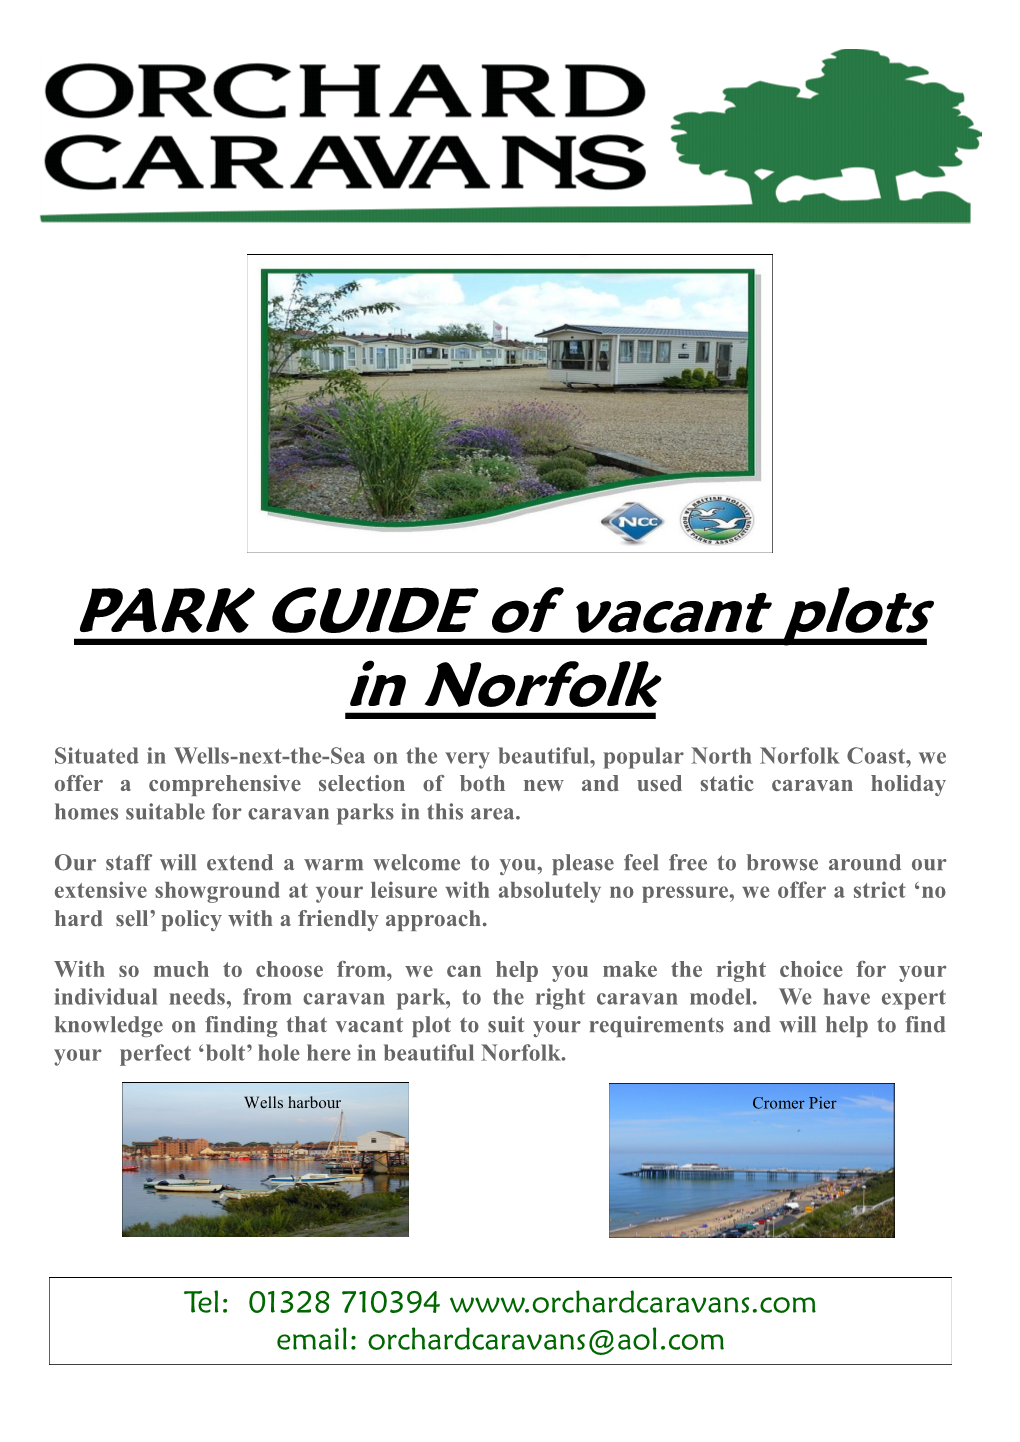 PARK GUIDE of Vacant Plots in Norfolk